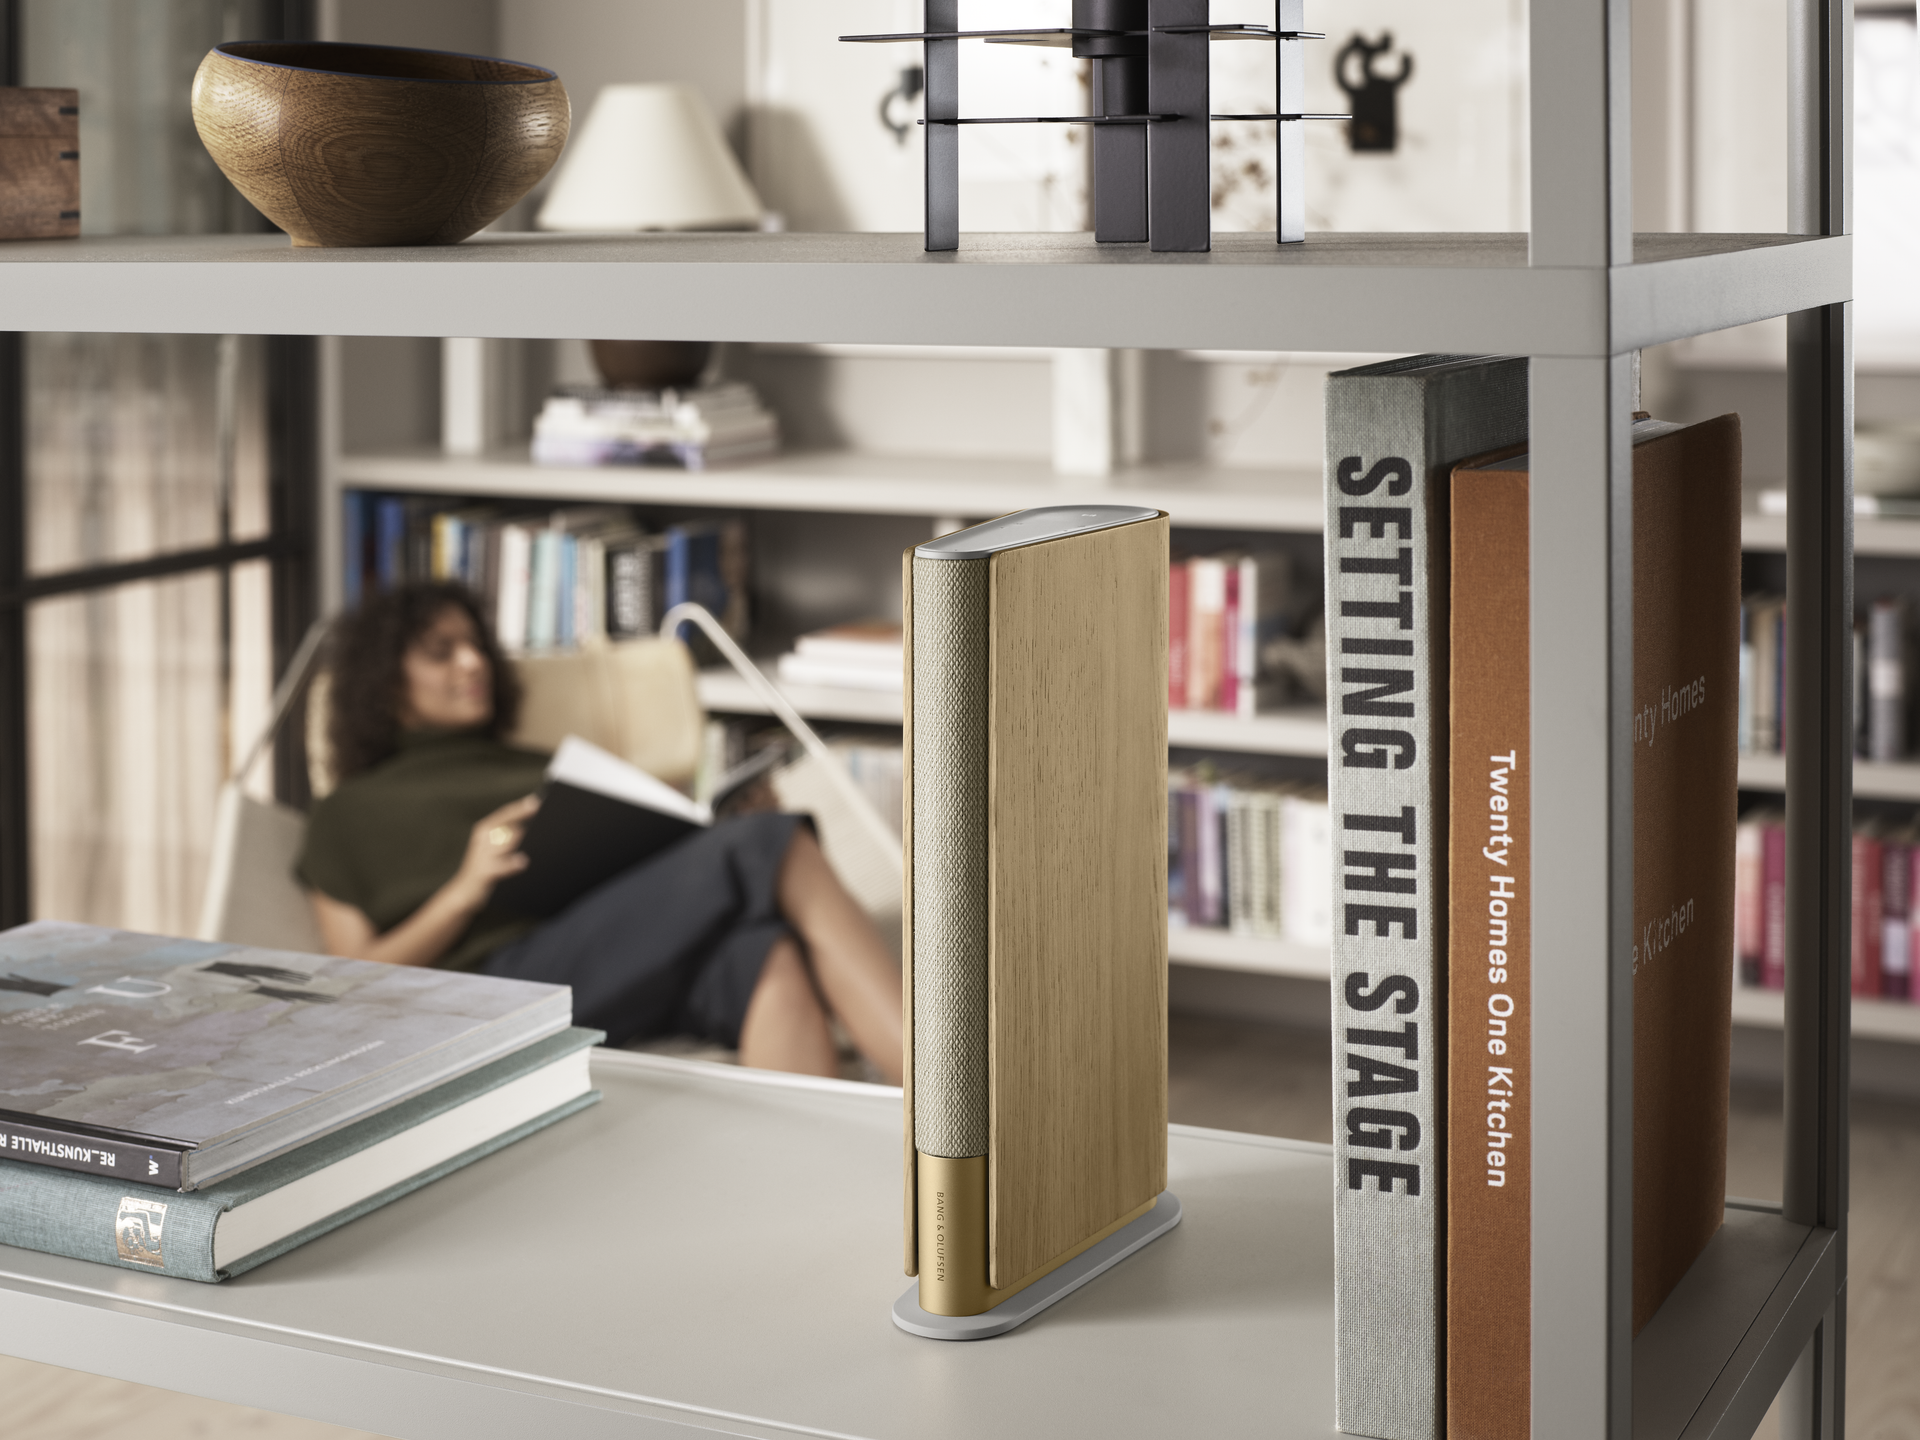 Bang & Olufsen’s new Beosound Emerge is a slim, book-inspired home speaker